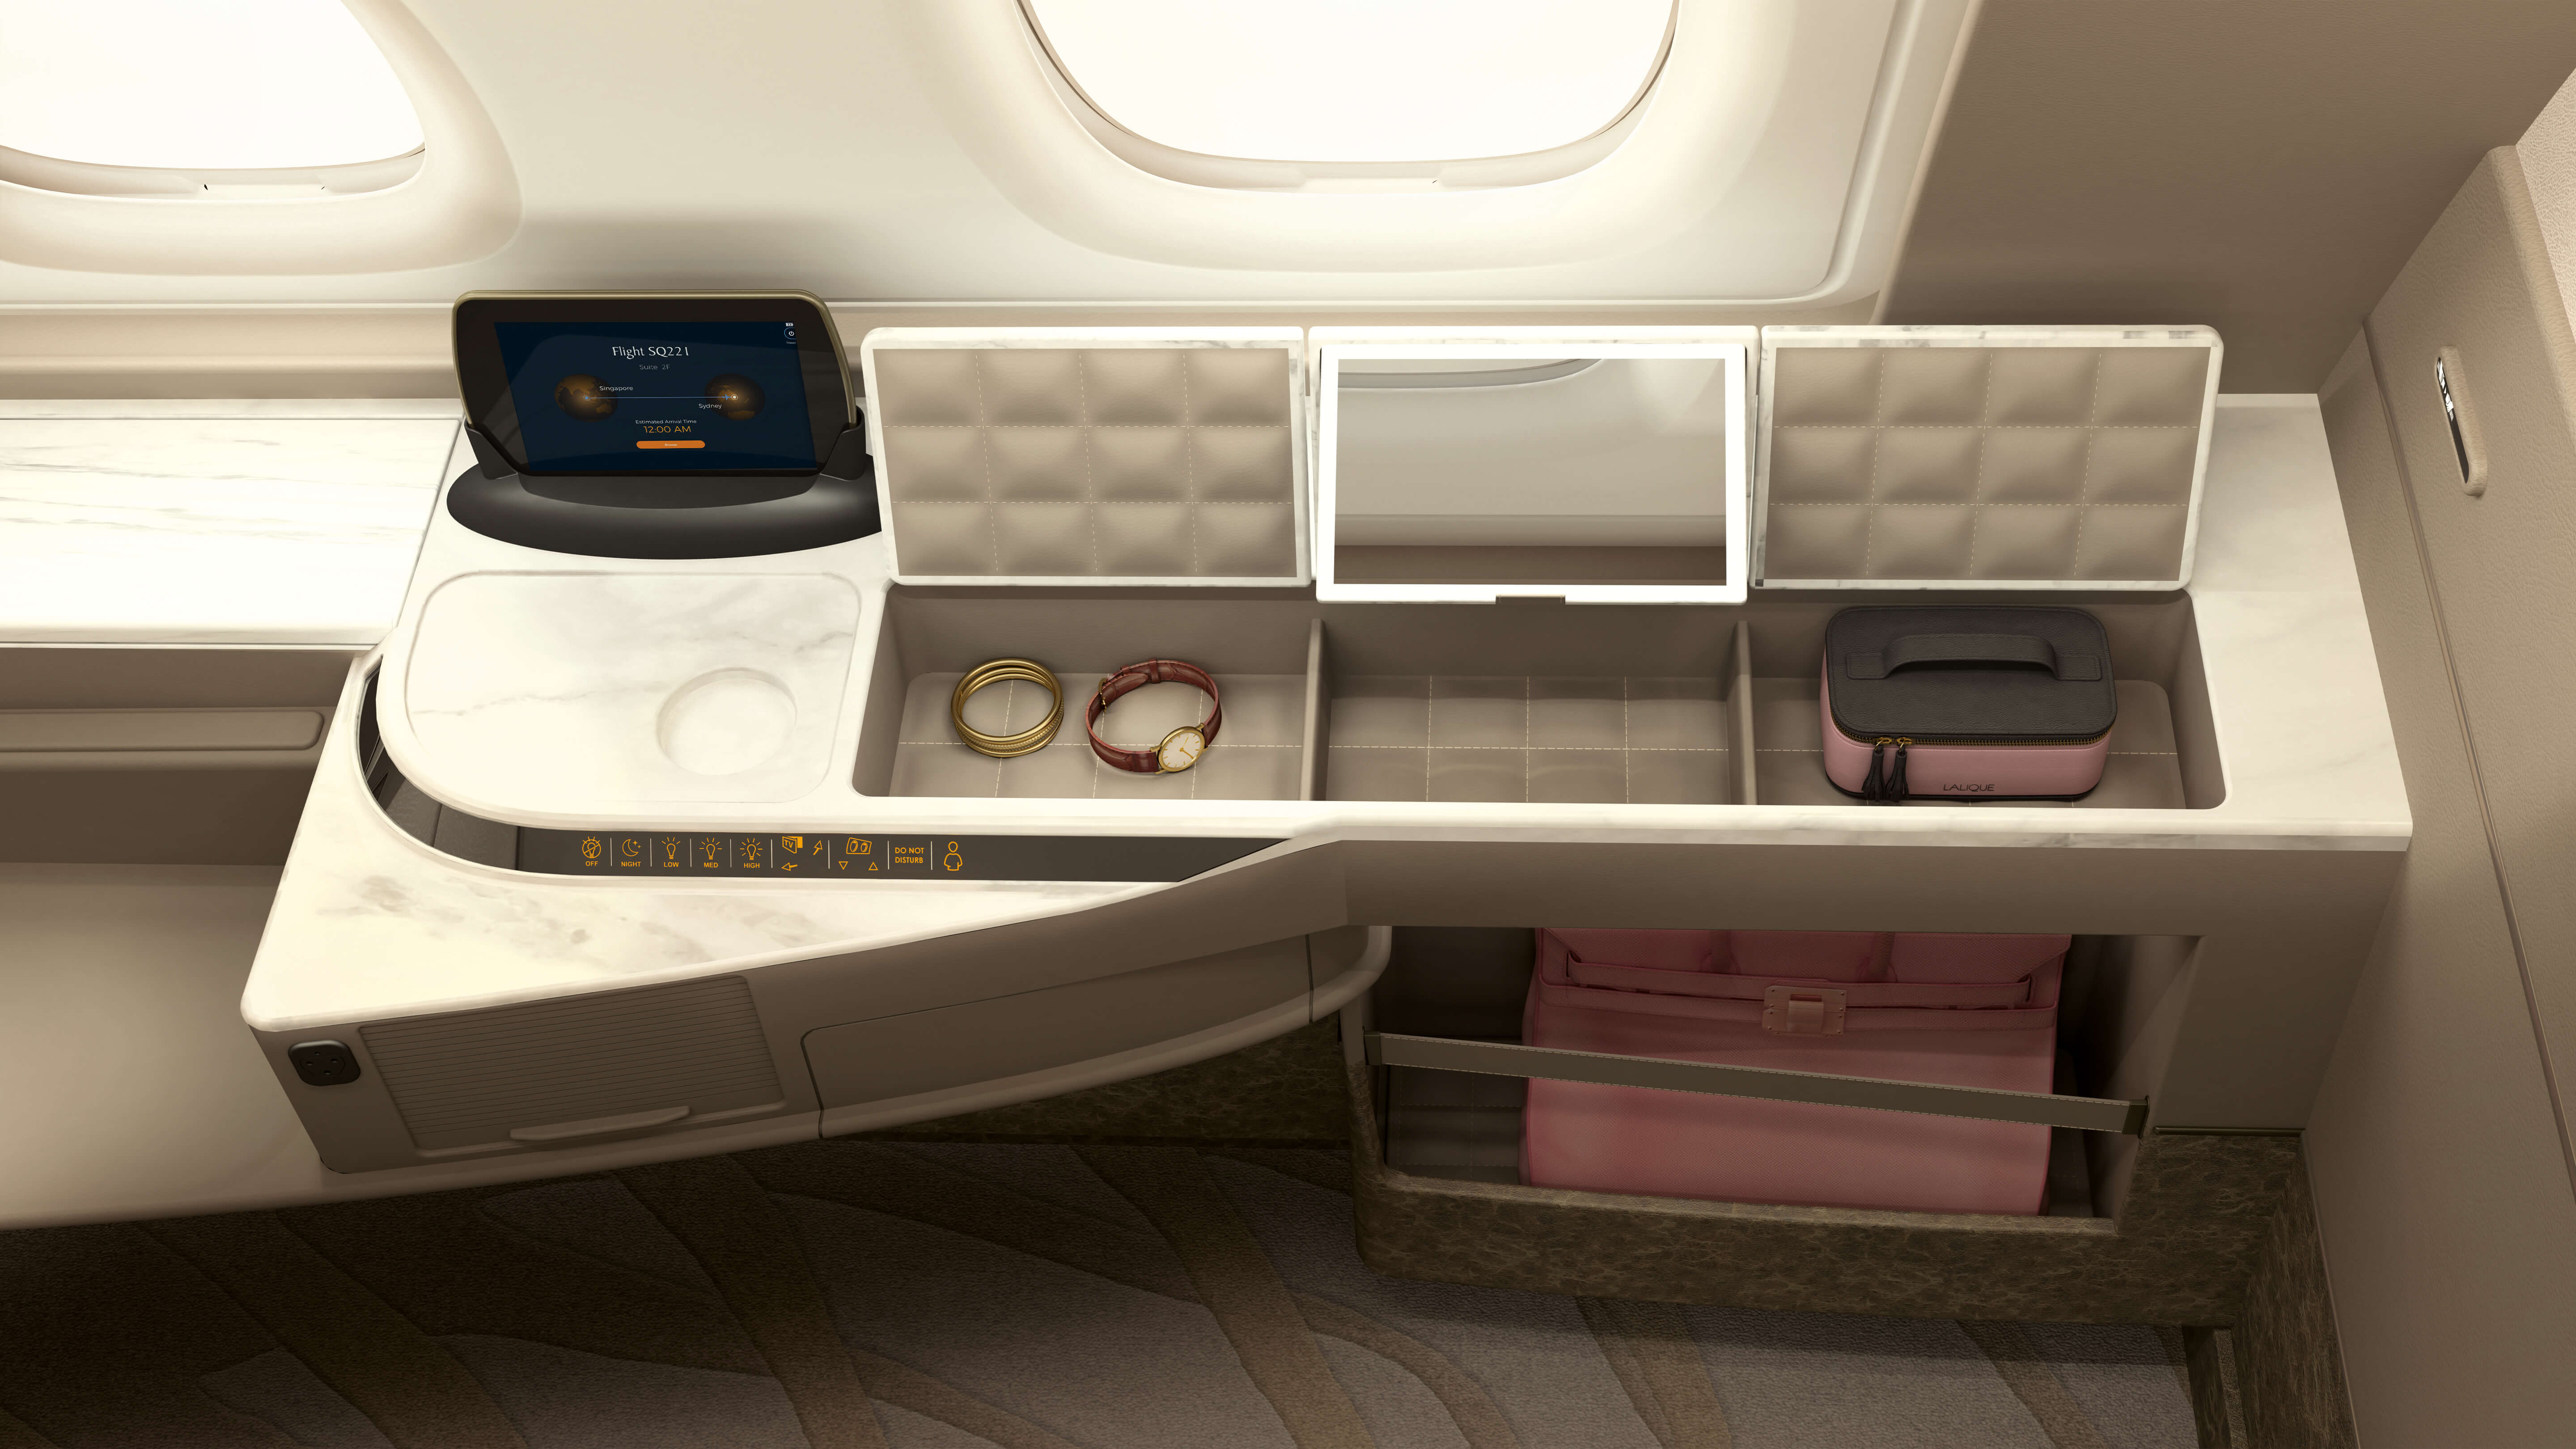 Singapore Airlines Officially Unveil Their New A380 First & Business